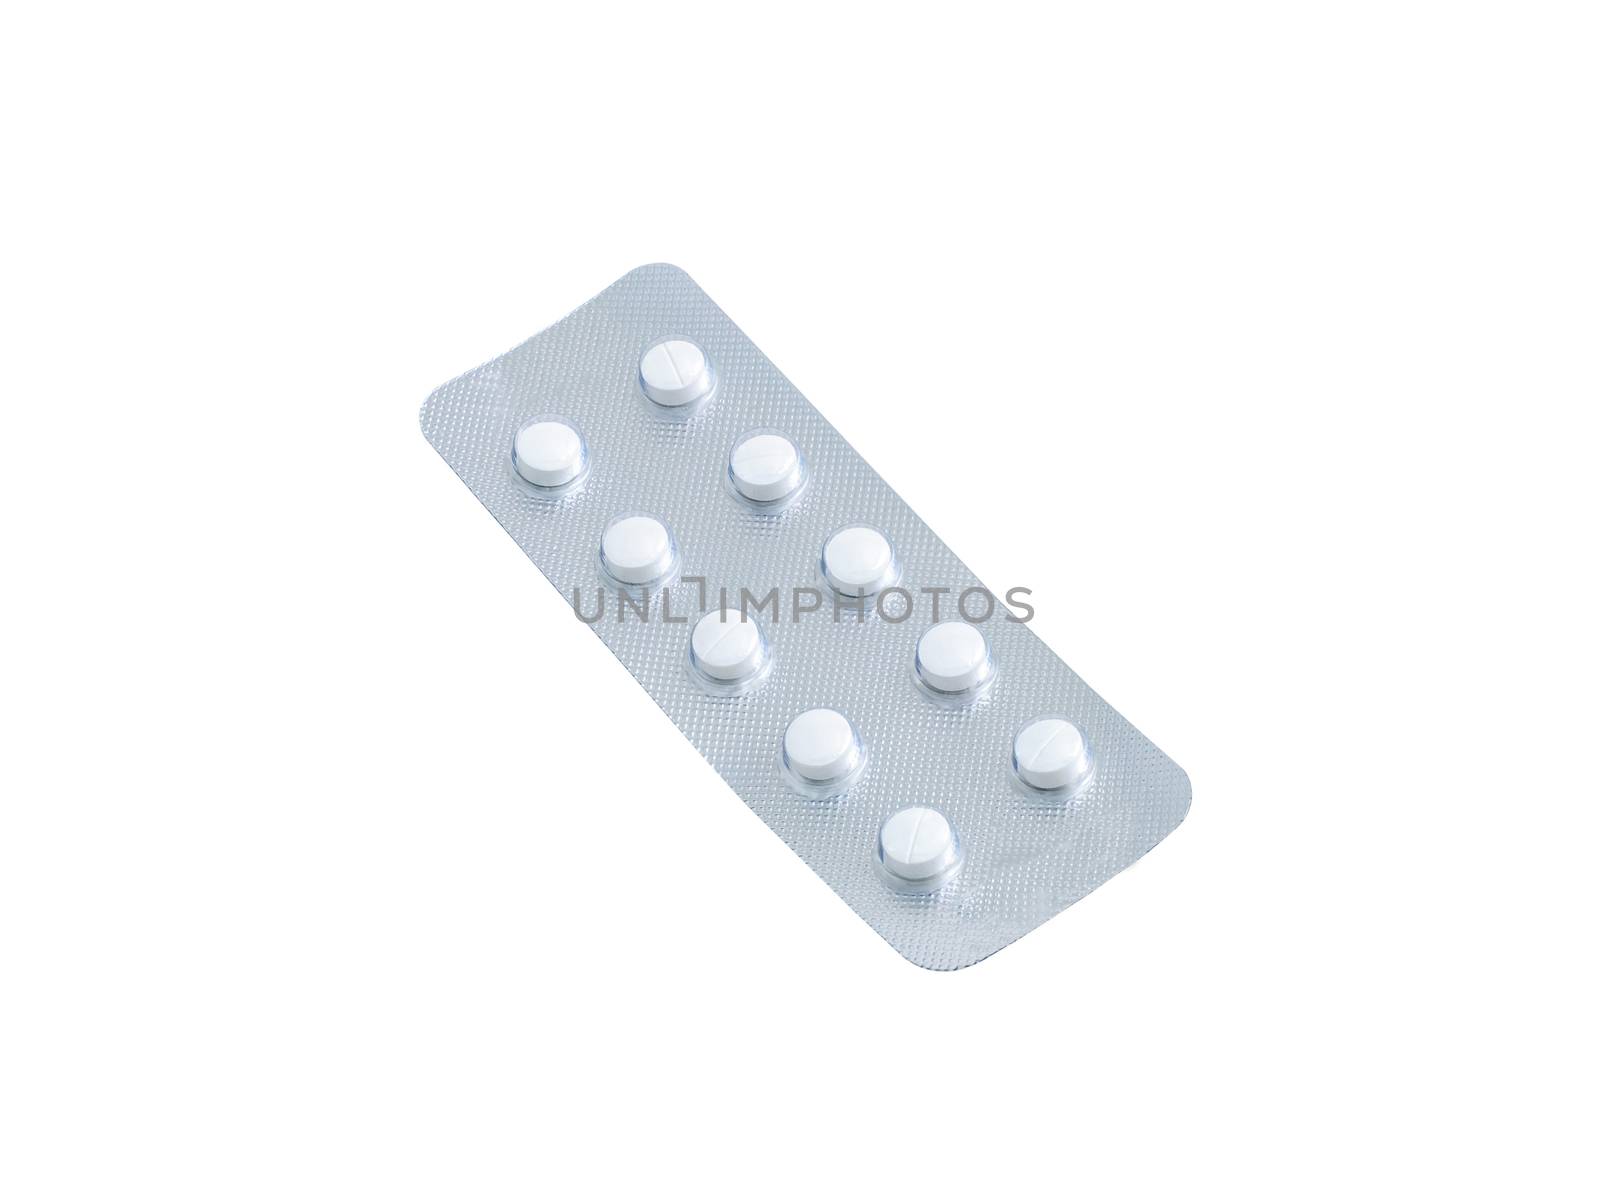 Packs of pills isolated  by NuwatPhoto